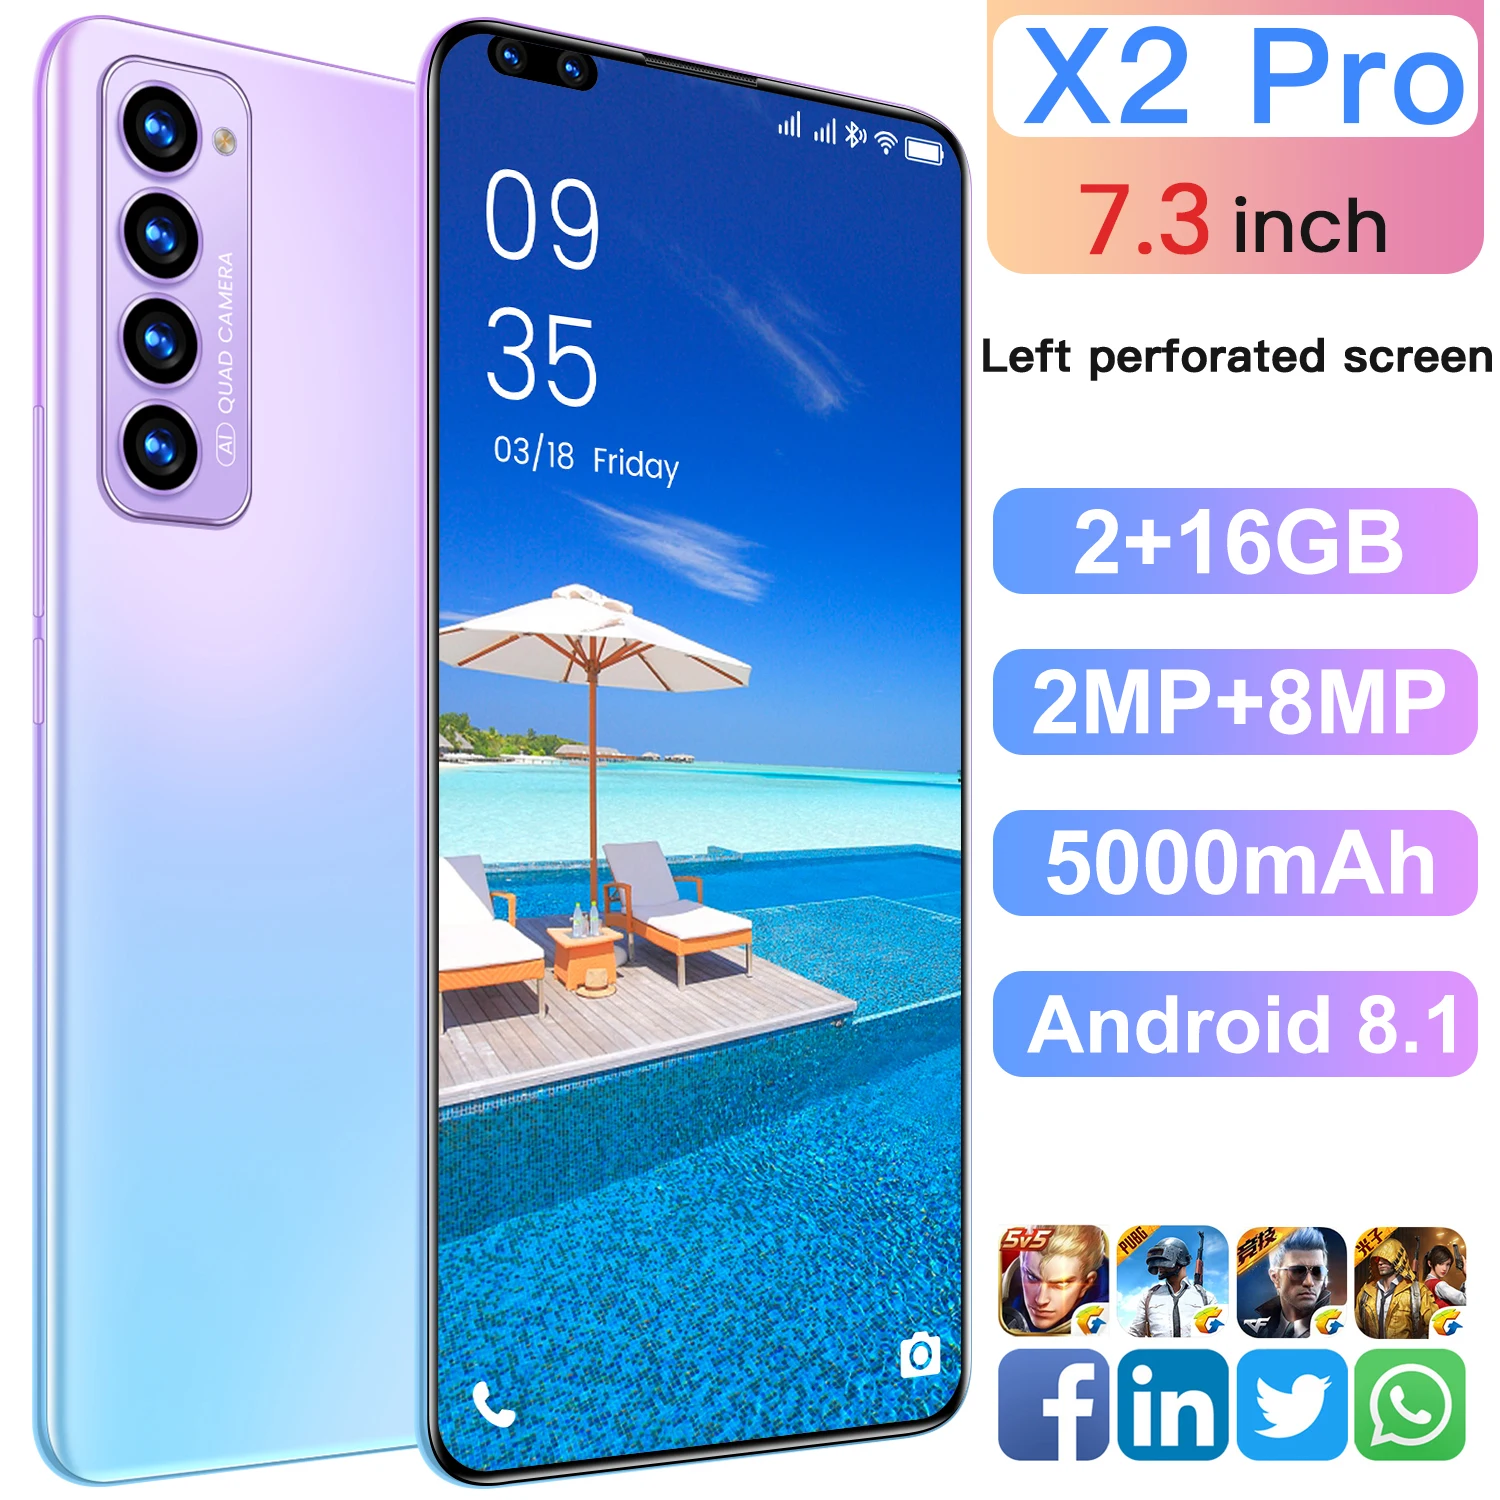 

Global Version X2Pro 2GB RAM 16GB ROM Smartphone 7.3 Inch Left Digging Screen Android Cellphone Unlocked Mobilephone Celular